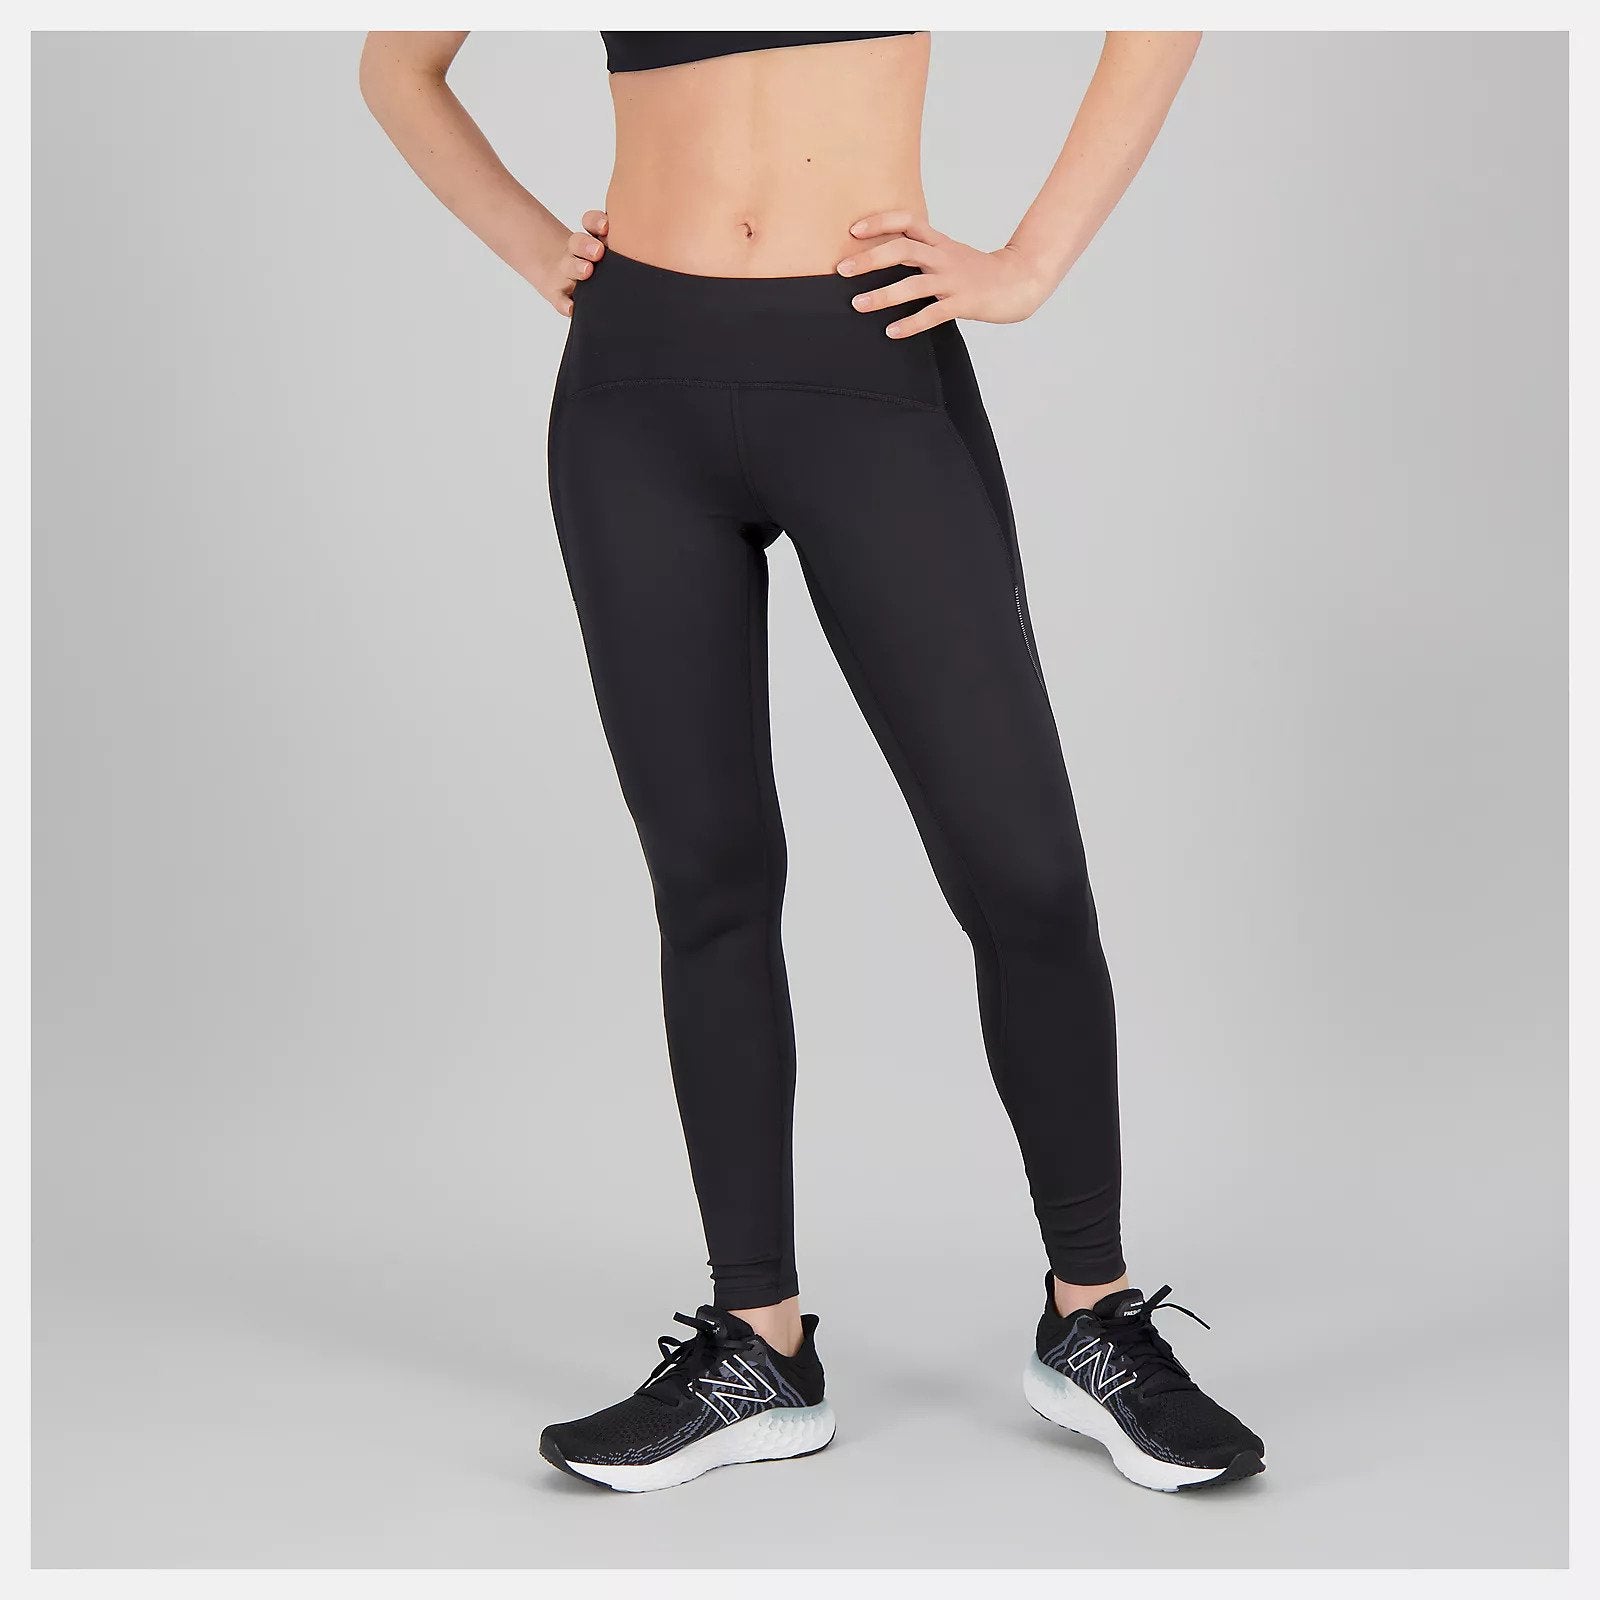 Stay focused on your run with the Impact Run Tight. These women's workout leggings include drop-in hip pockets and a zippered back pocket to store your nutrition, phone, keys and more. Plus, the handy storage tunnel lets you thread extra layers through for a totally hands-free run. Finished with moisture-wicking NB DRYx technology for comfort.